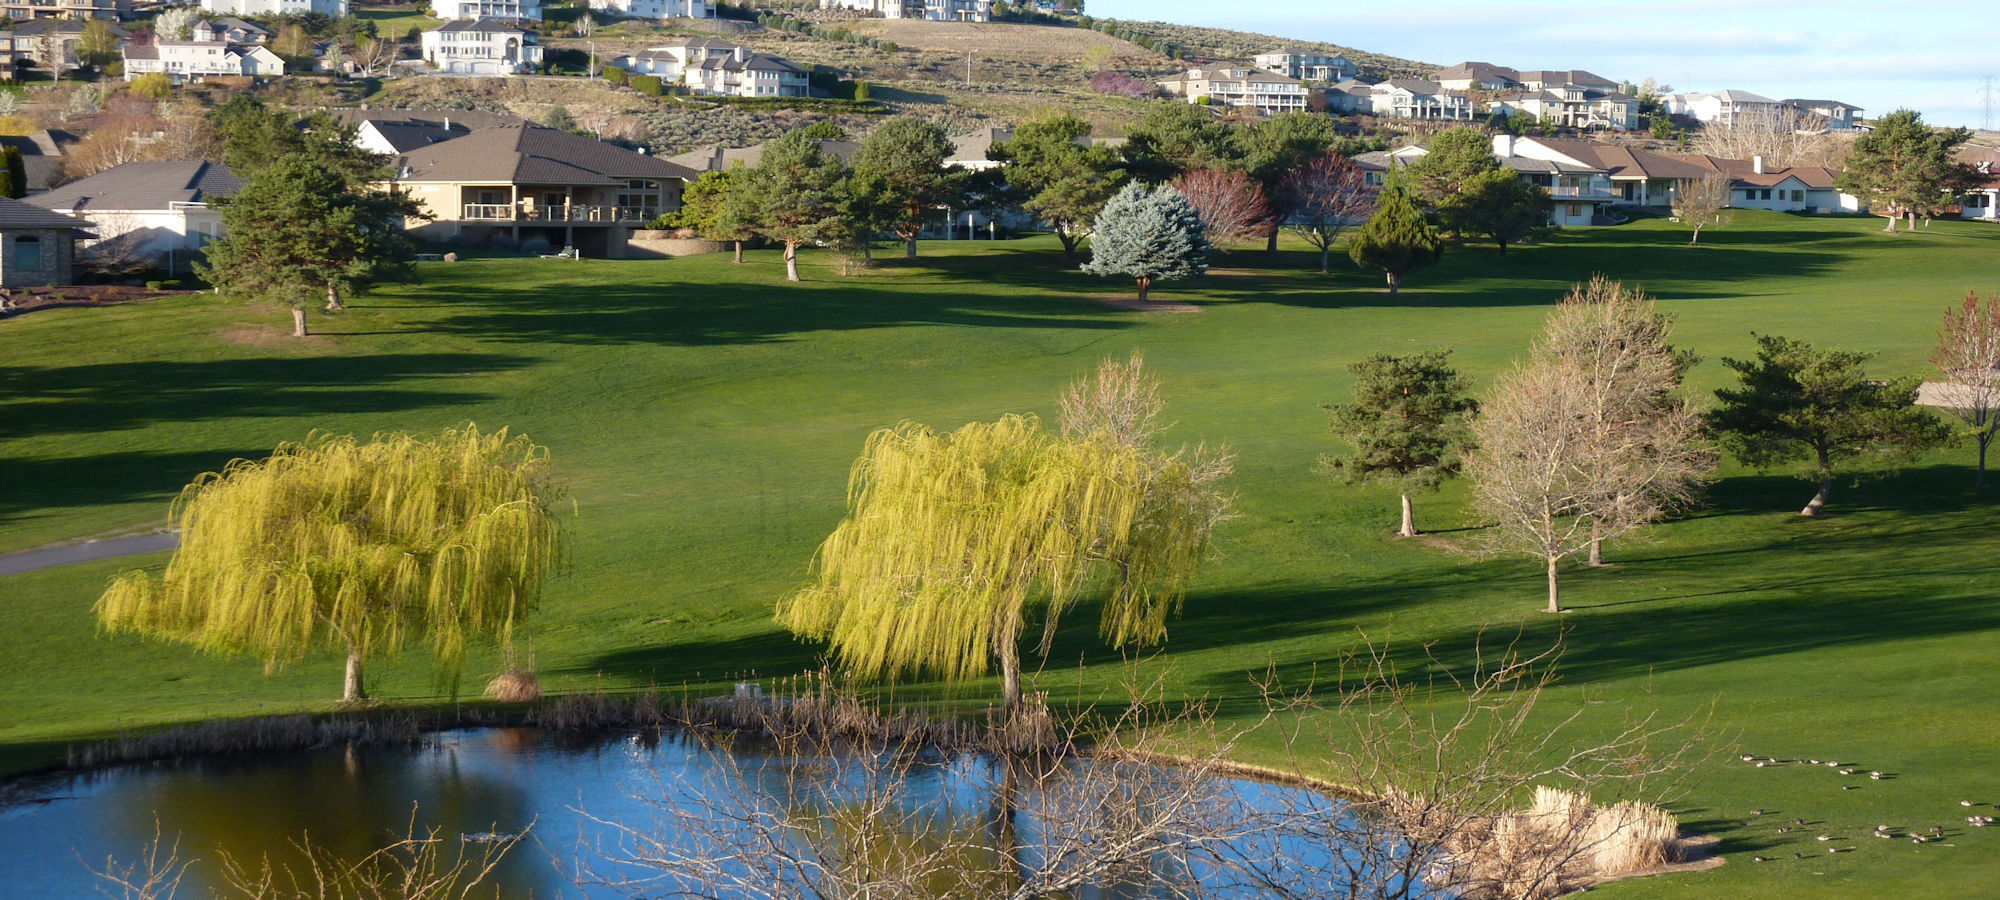 Canyon Lakes Homes for Sale & Real Estate in Kennewick WA | Local Realtor® Company, Houses Updated Hourly, Call or Text Colleen @ 509.438.9344 Available Now!